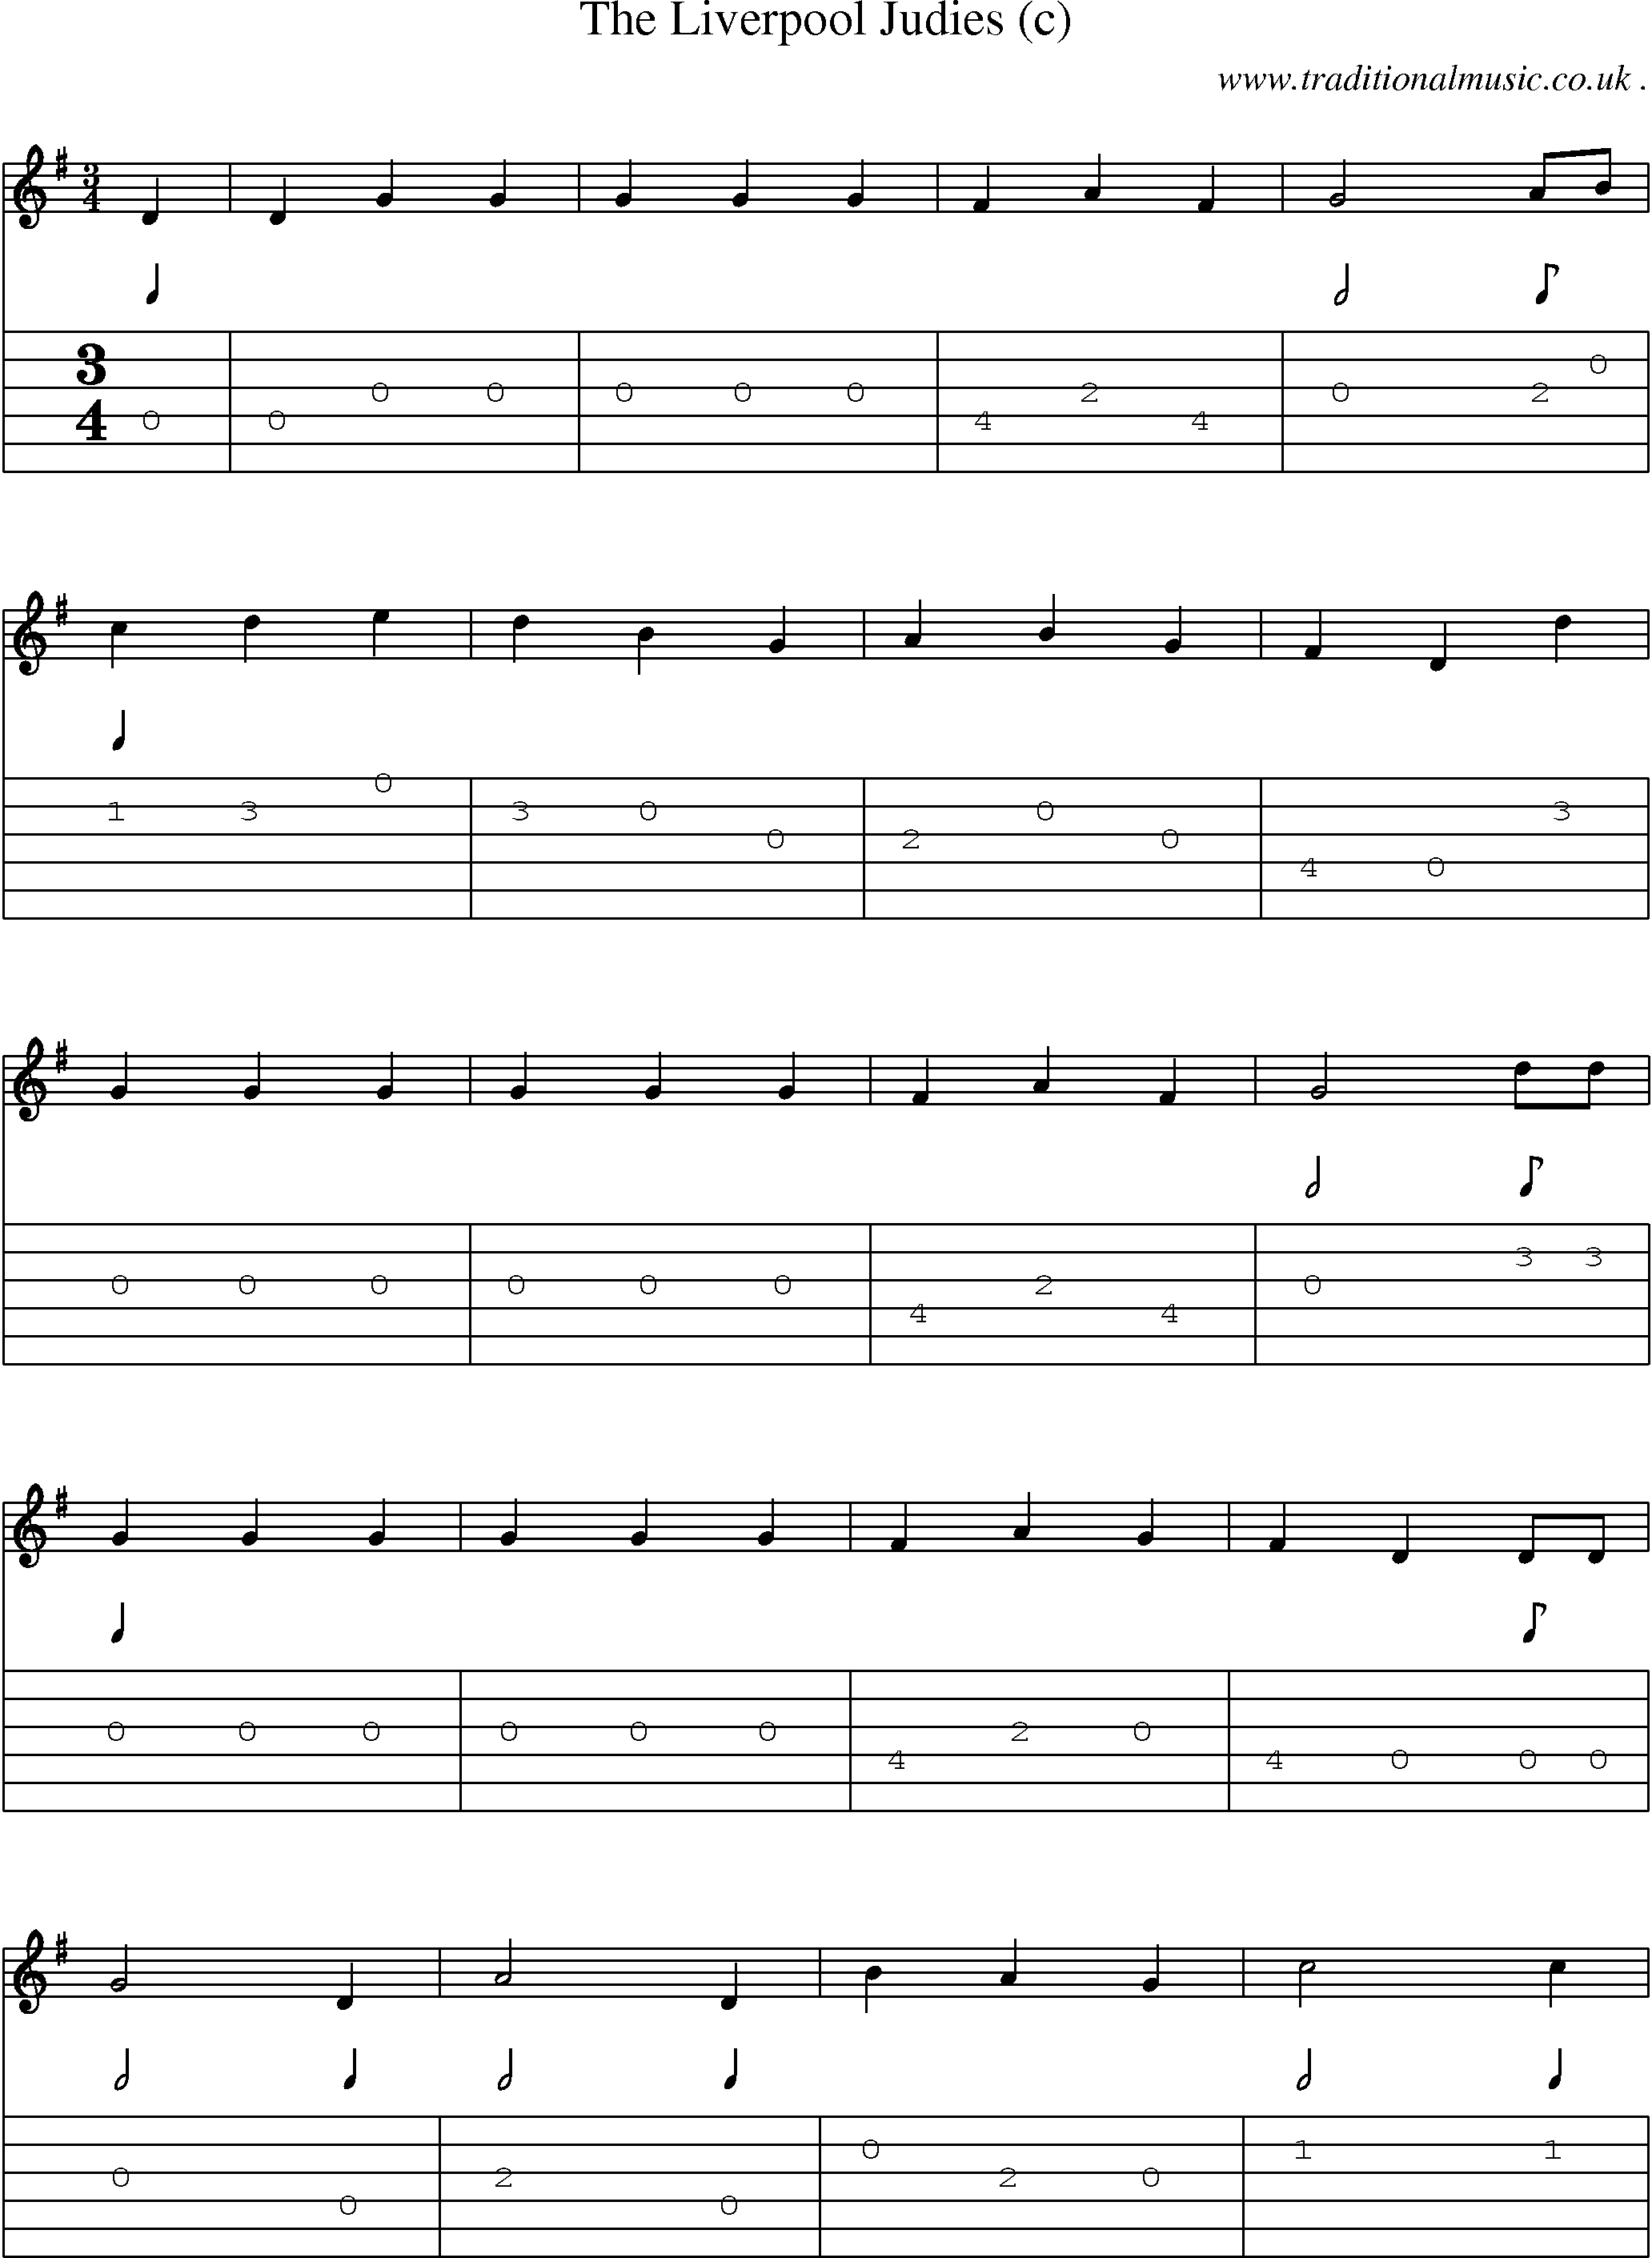 Sheet-Music and Guitar Tabs for The Liverpool Judies (c)